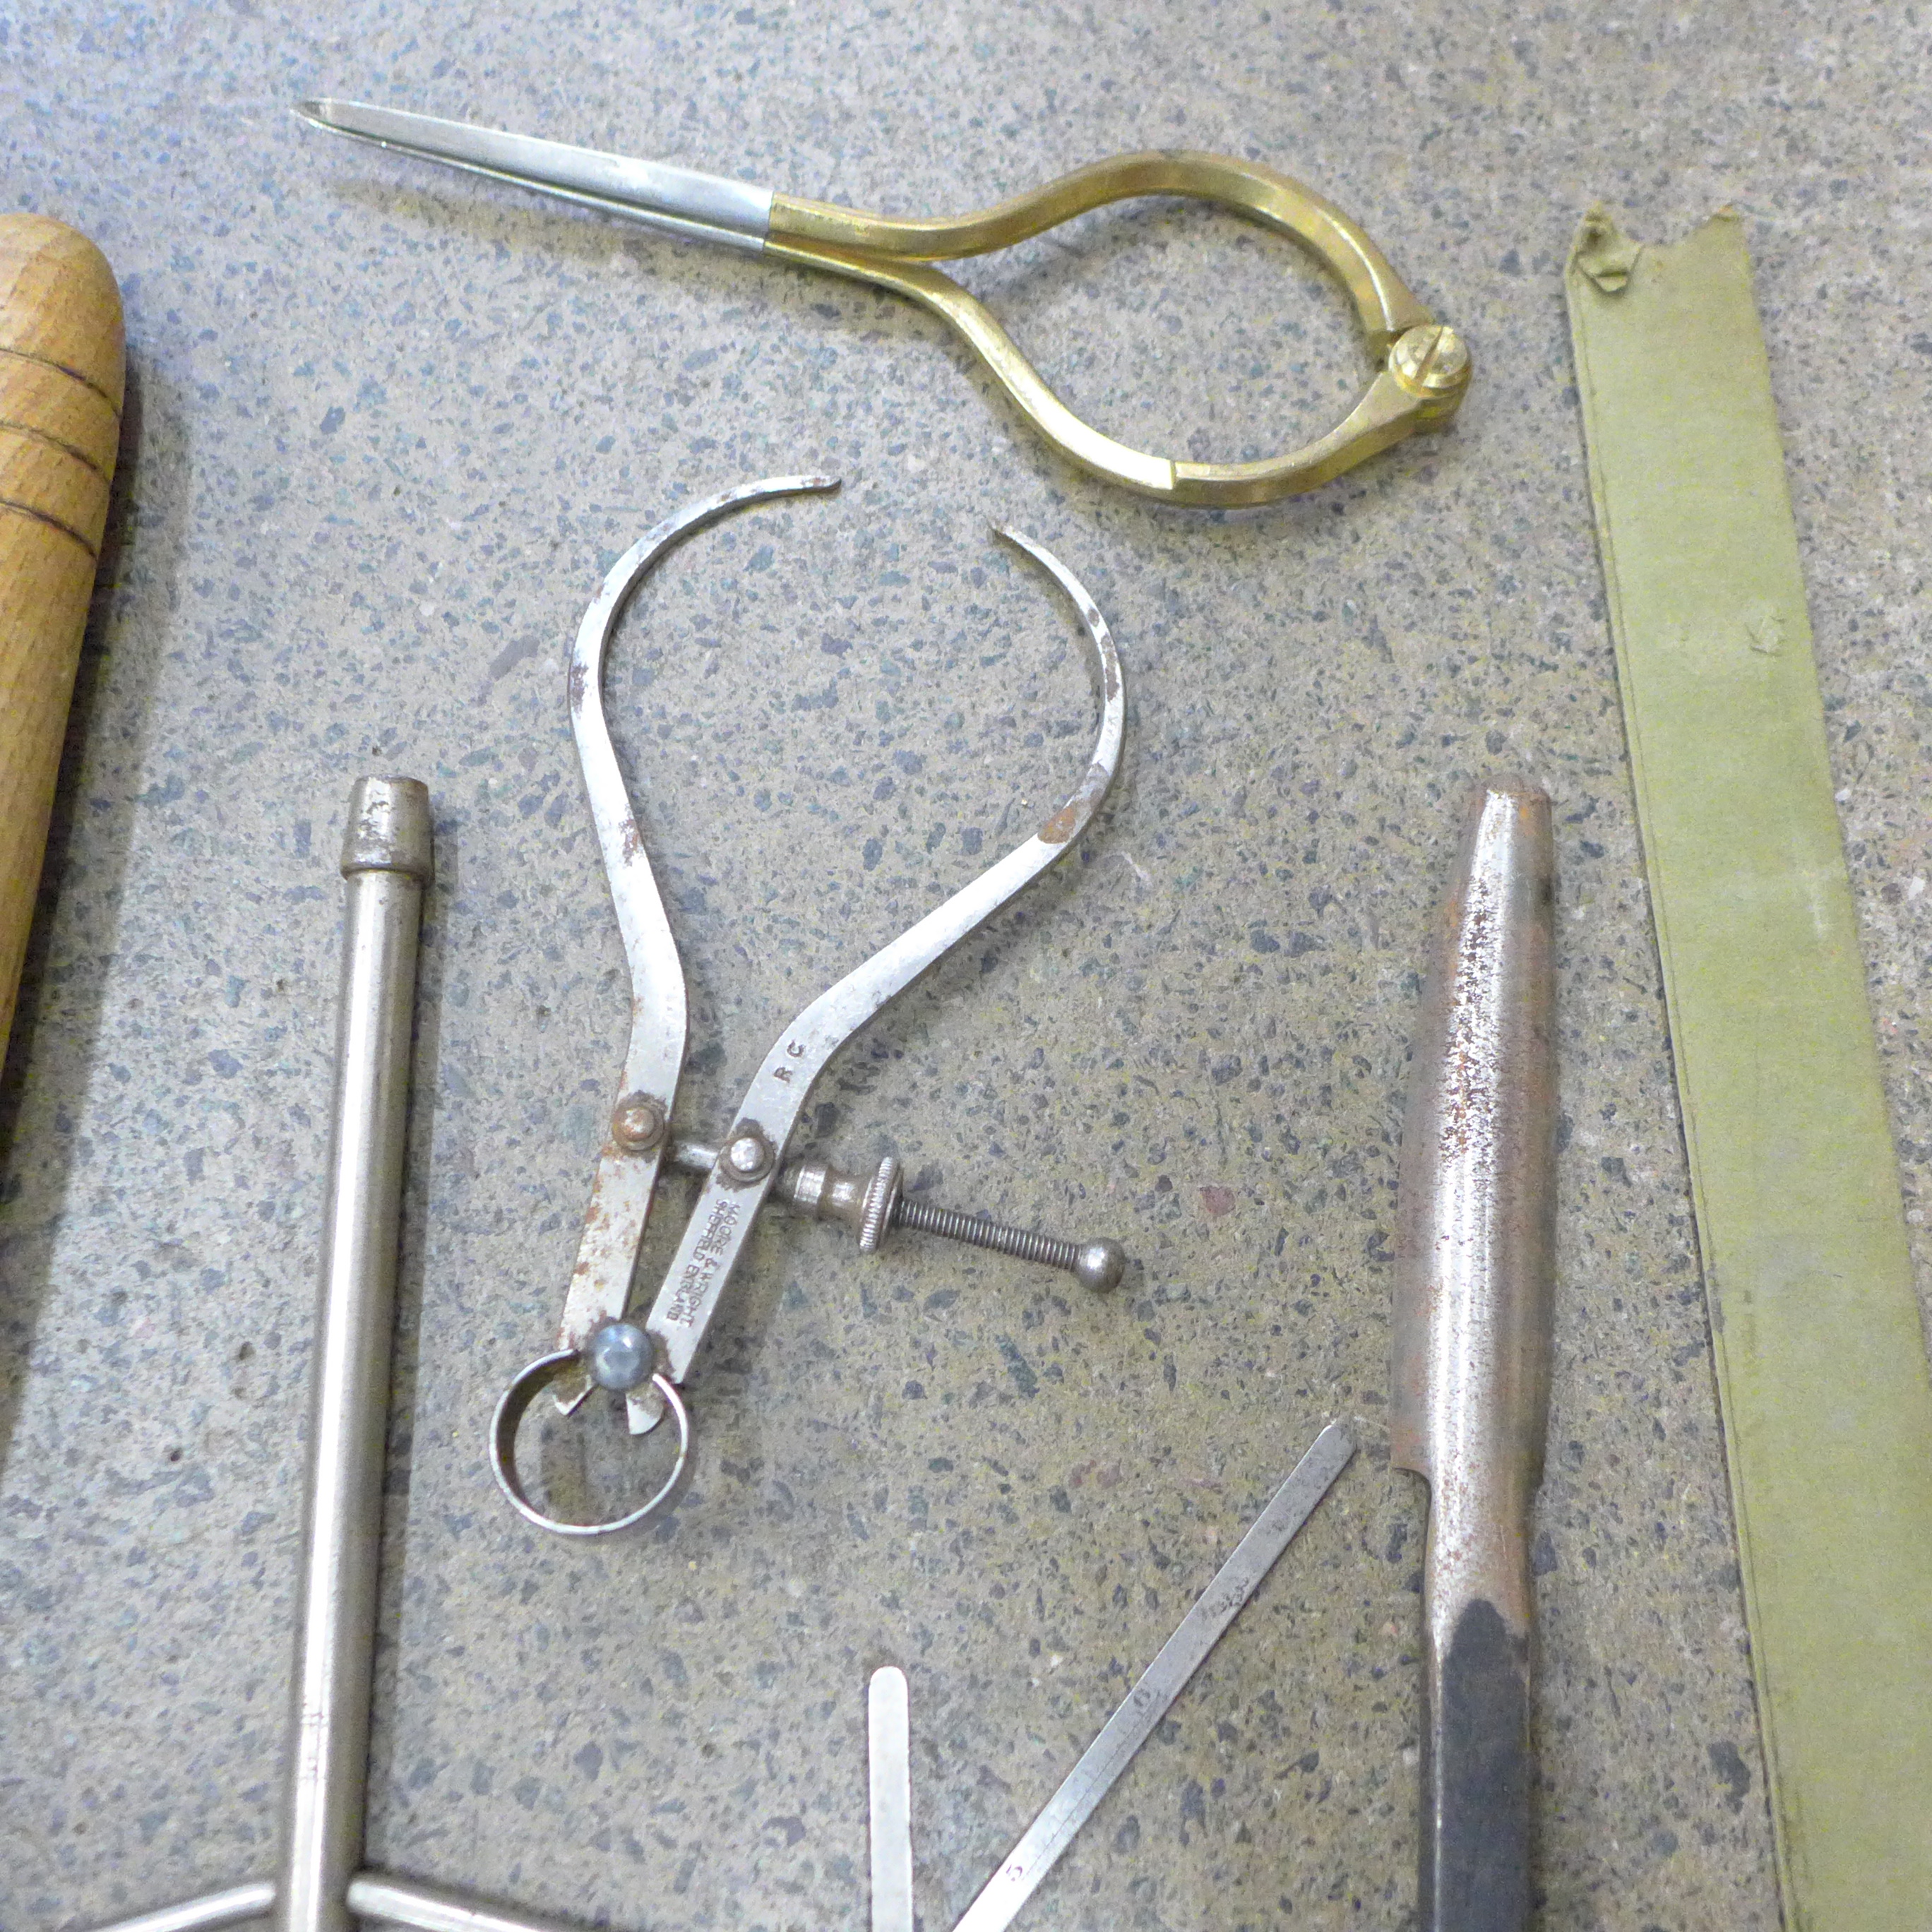 Five carving chisels and engineering items including depth gauges and calipers - Image 3 of 6